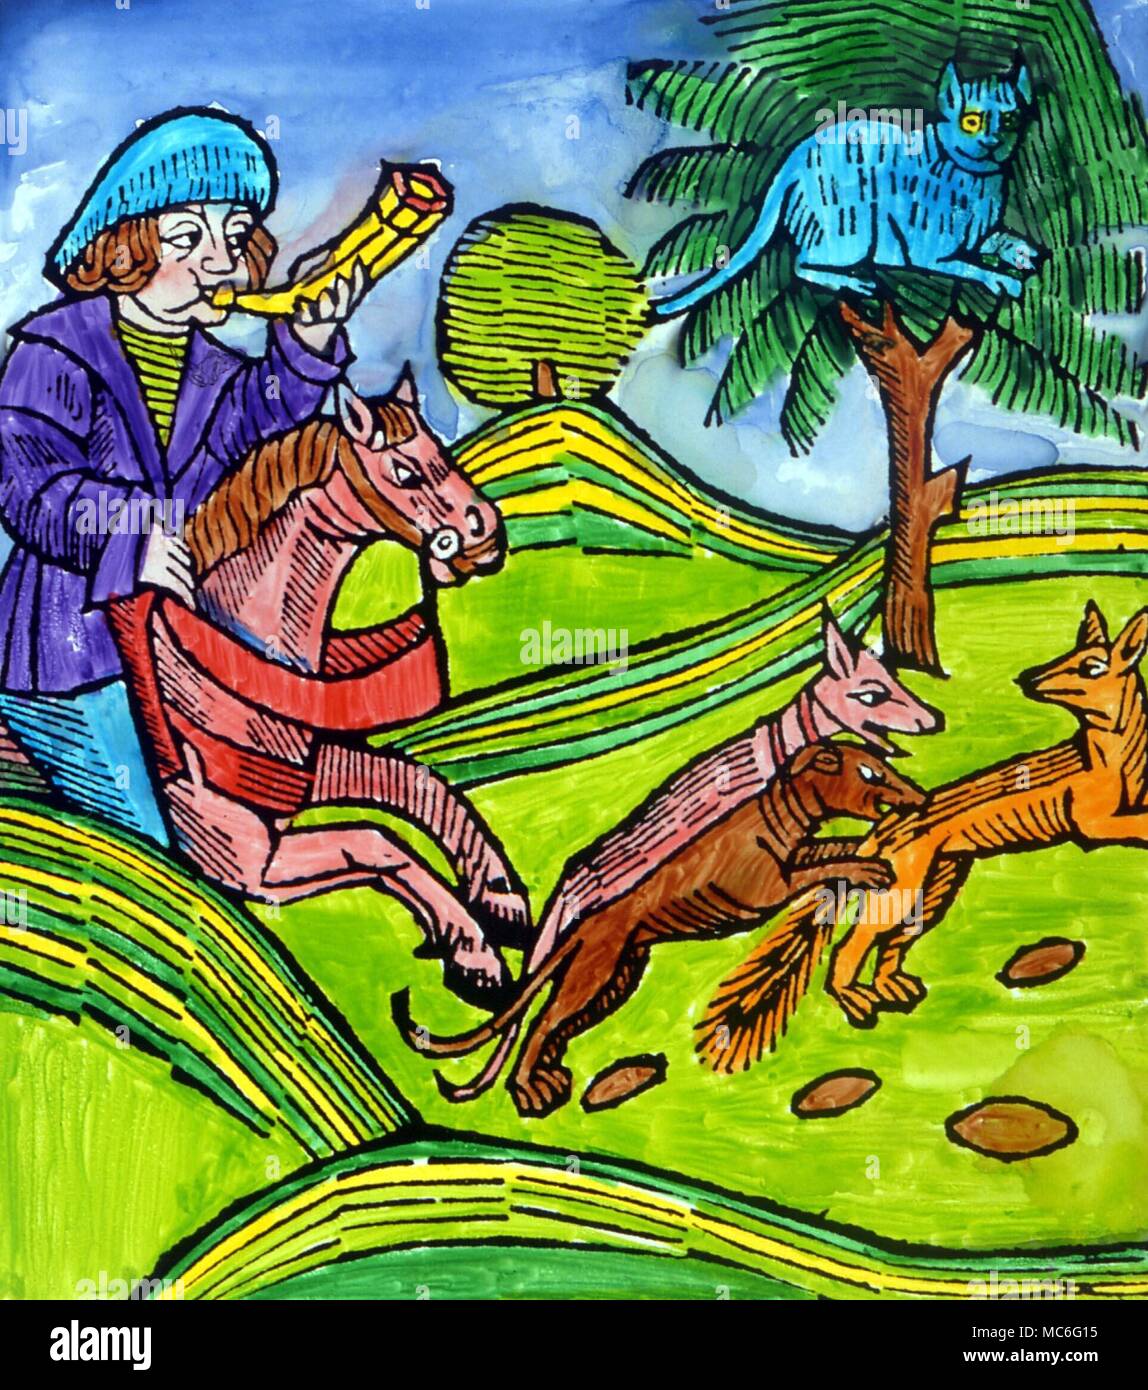 Fox chased by hounds. Illustration to Aesop's tale, The Cat and the Fox, from a 16th century edition of Aesop. Stock Photo